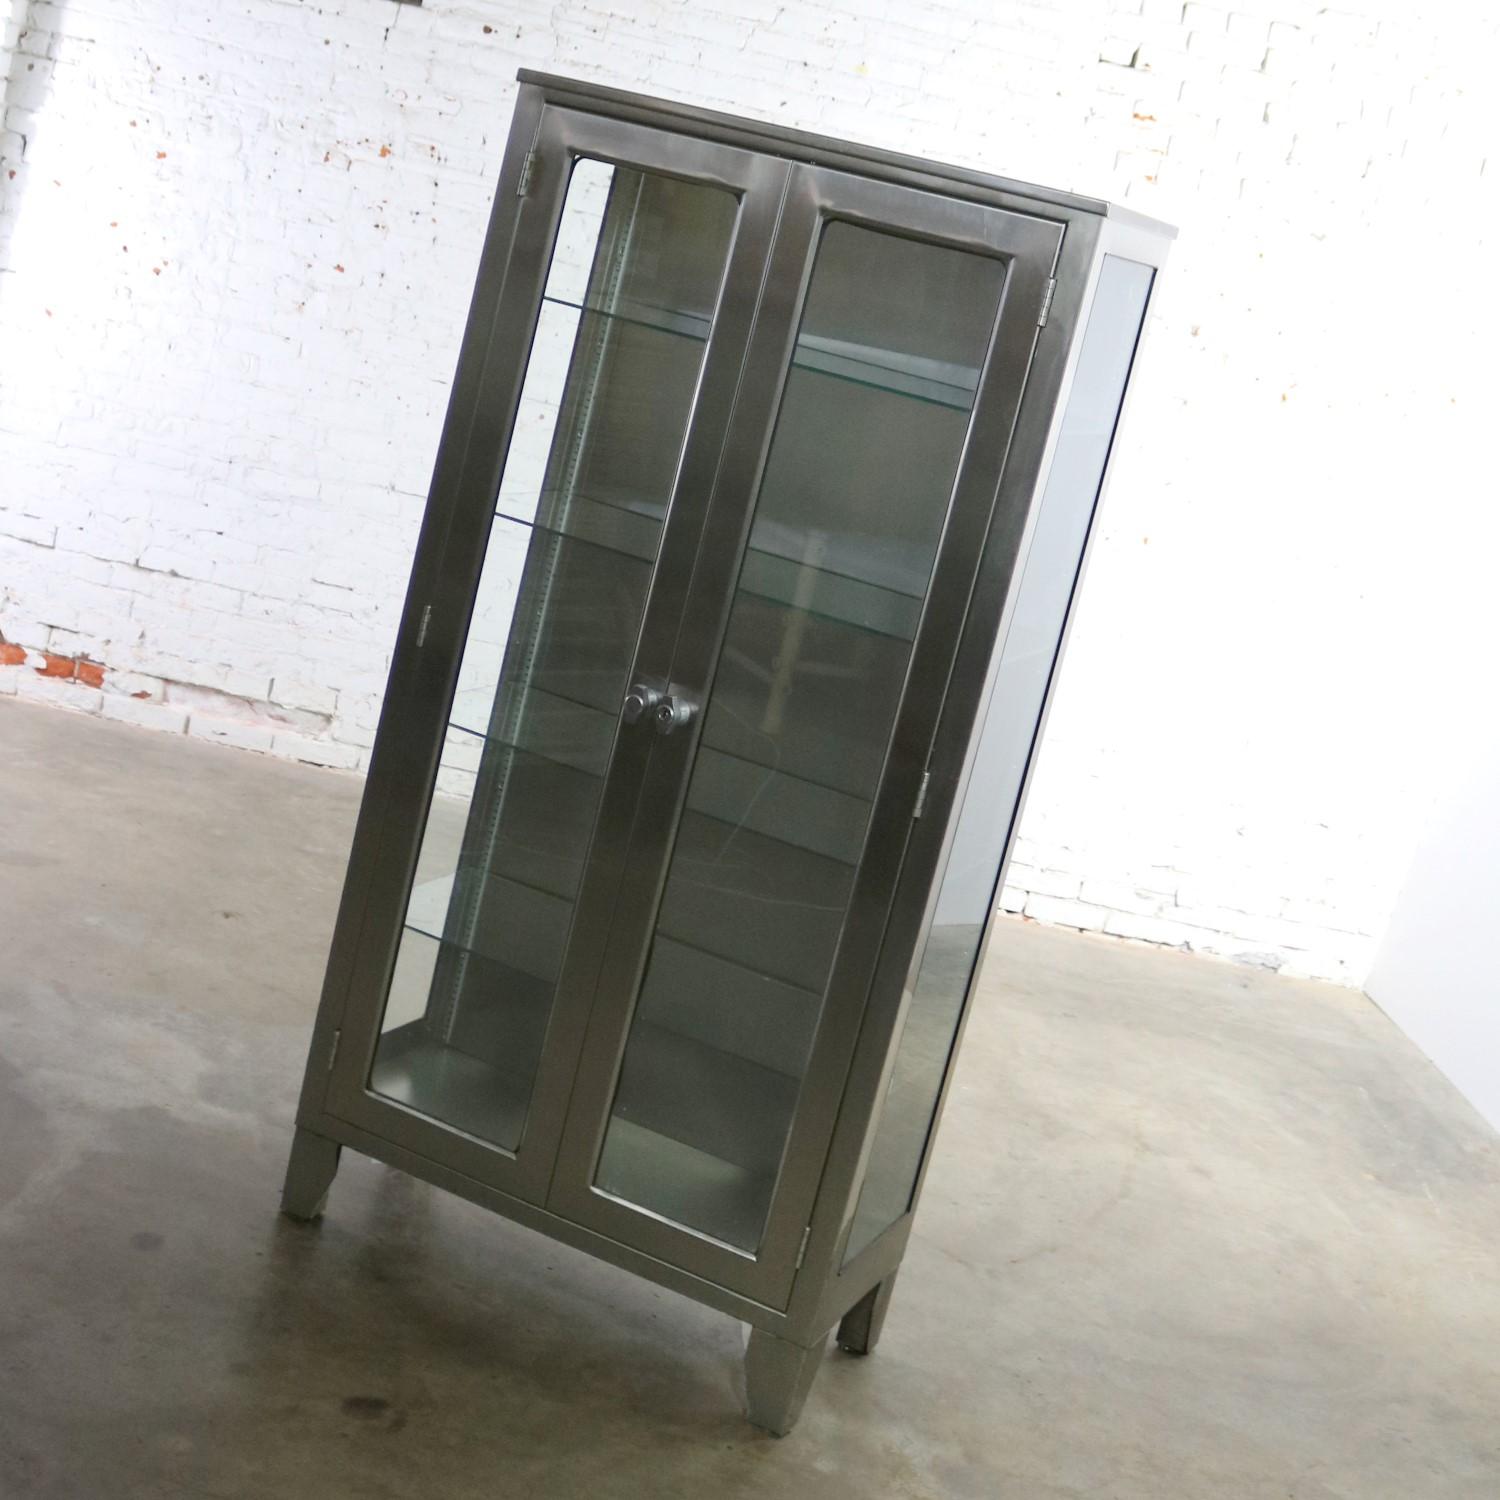 Stainless Steel Industrial Display Apothecary Medical Cabinet with Glass Doors 6 8